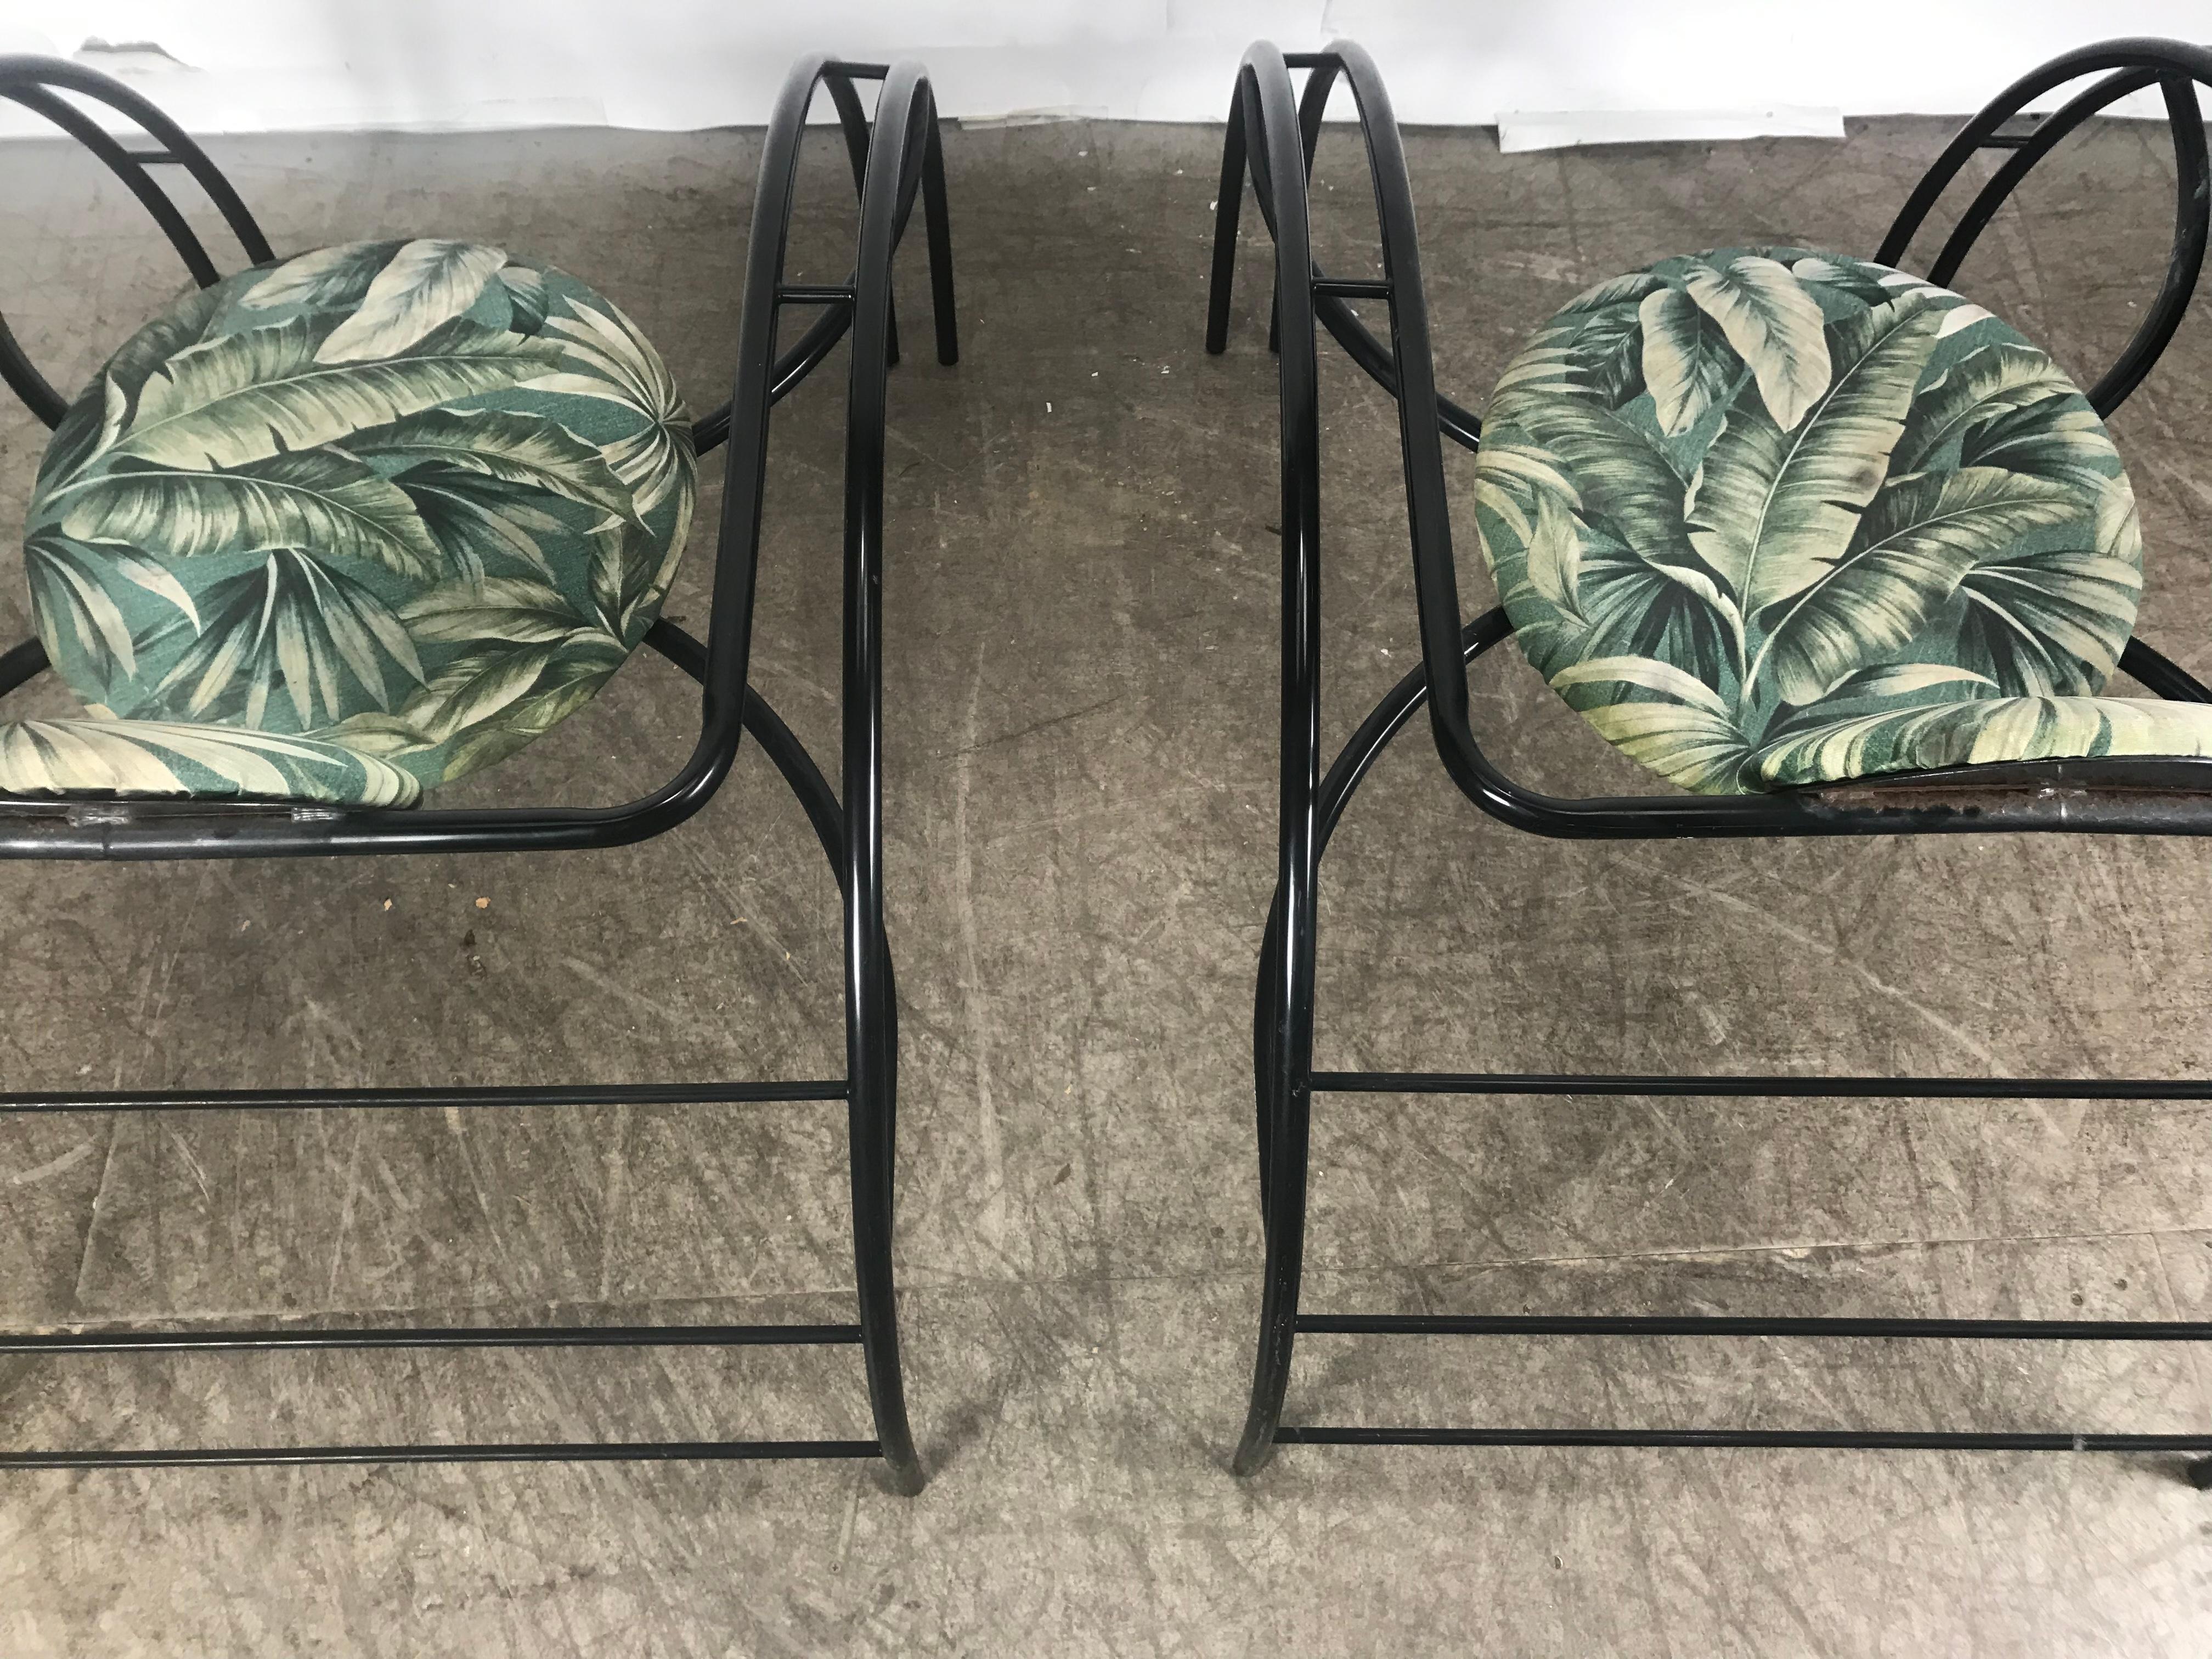 Painted Quebec 69 Spider Chairs, Les Amisco Memphis Style, Space Age